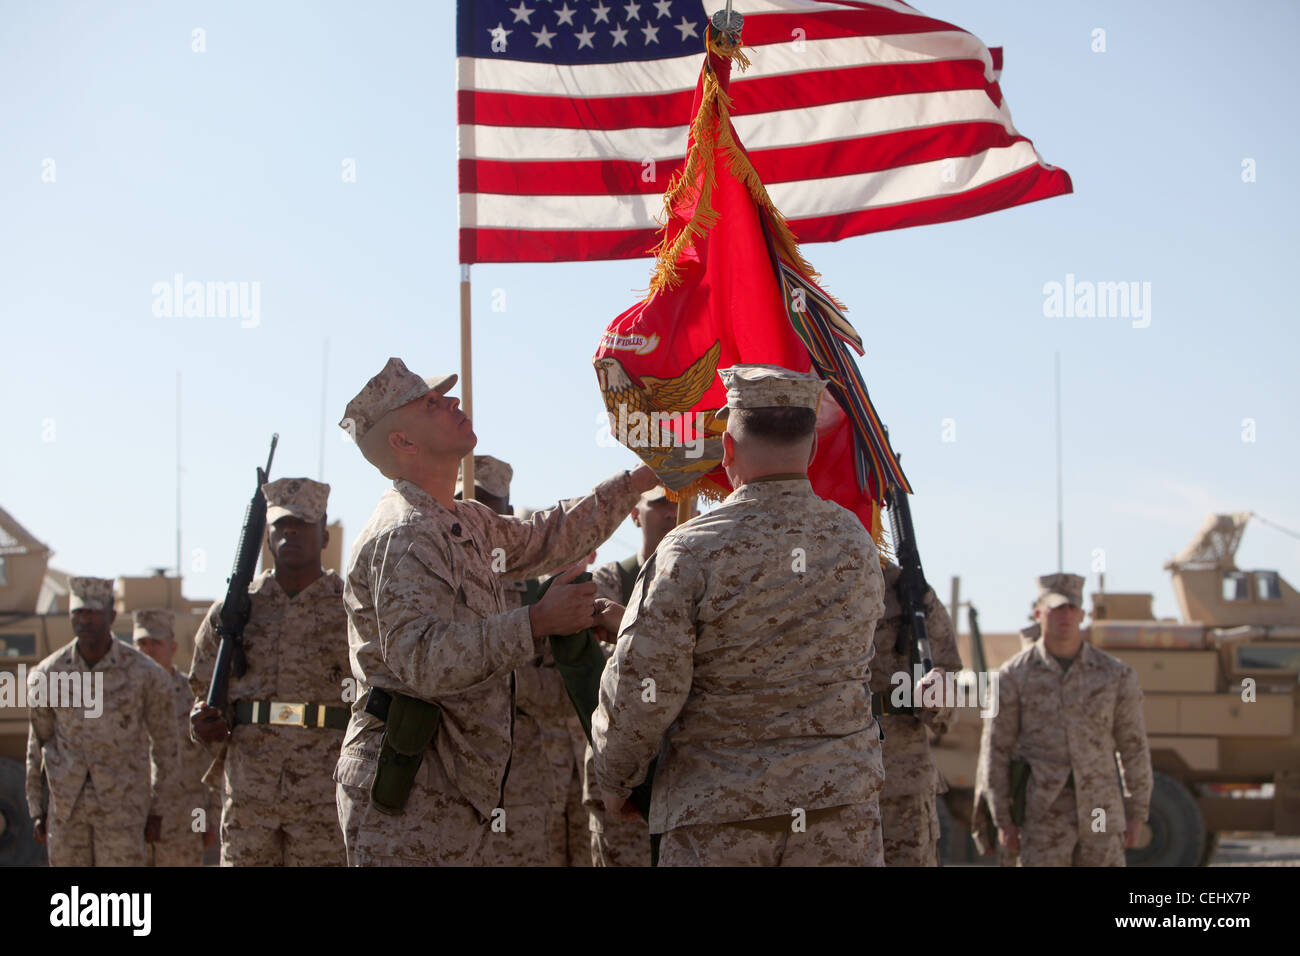 Brig. Gen. John J. Broadmeadow (right), commanding general of 1st Marine Logistics Group (Forward), and Sgt. Maj. Antonio Vizcarrondo (left), the group sergeant major, uncase the unit's colors during a transfer of authority ceremony aboard Camp Leatherneck, Afghanistan, Feb. 15. For the next year, 1st MLG (FWD) will serve as the Logistics Combat Element in southern Afghanistan. Stock Photo